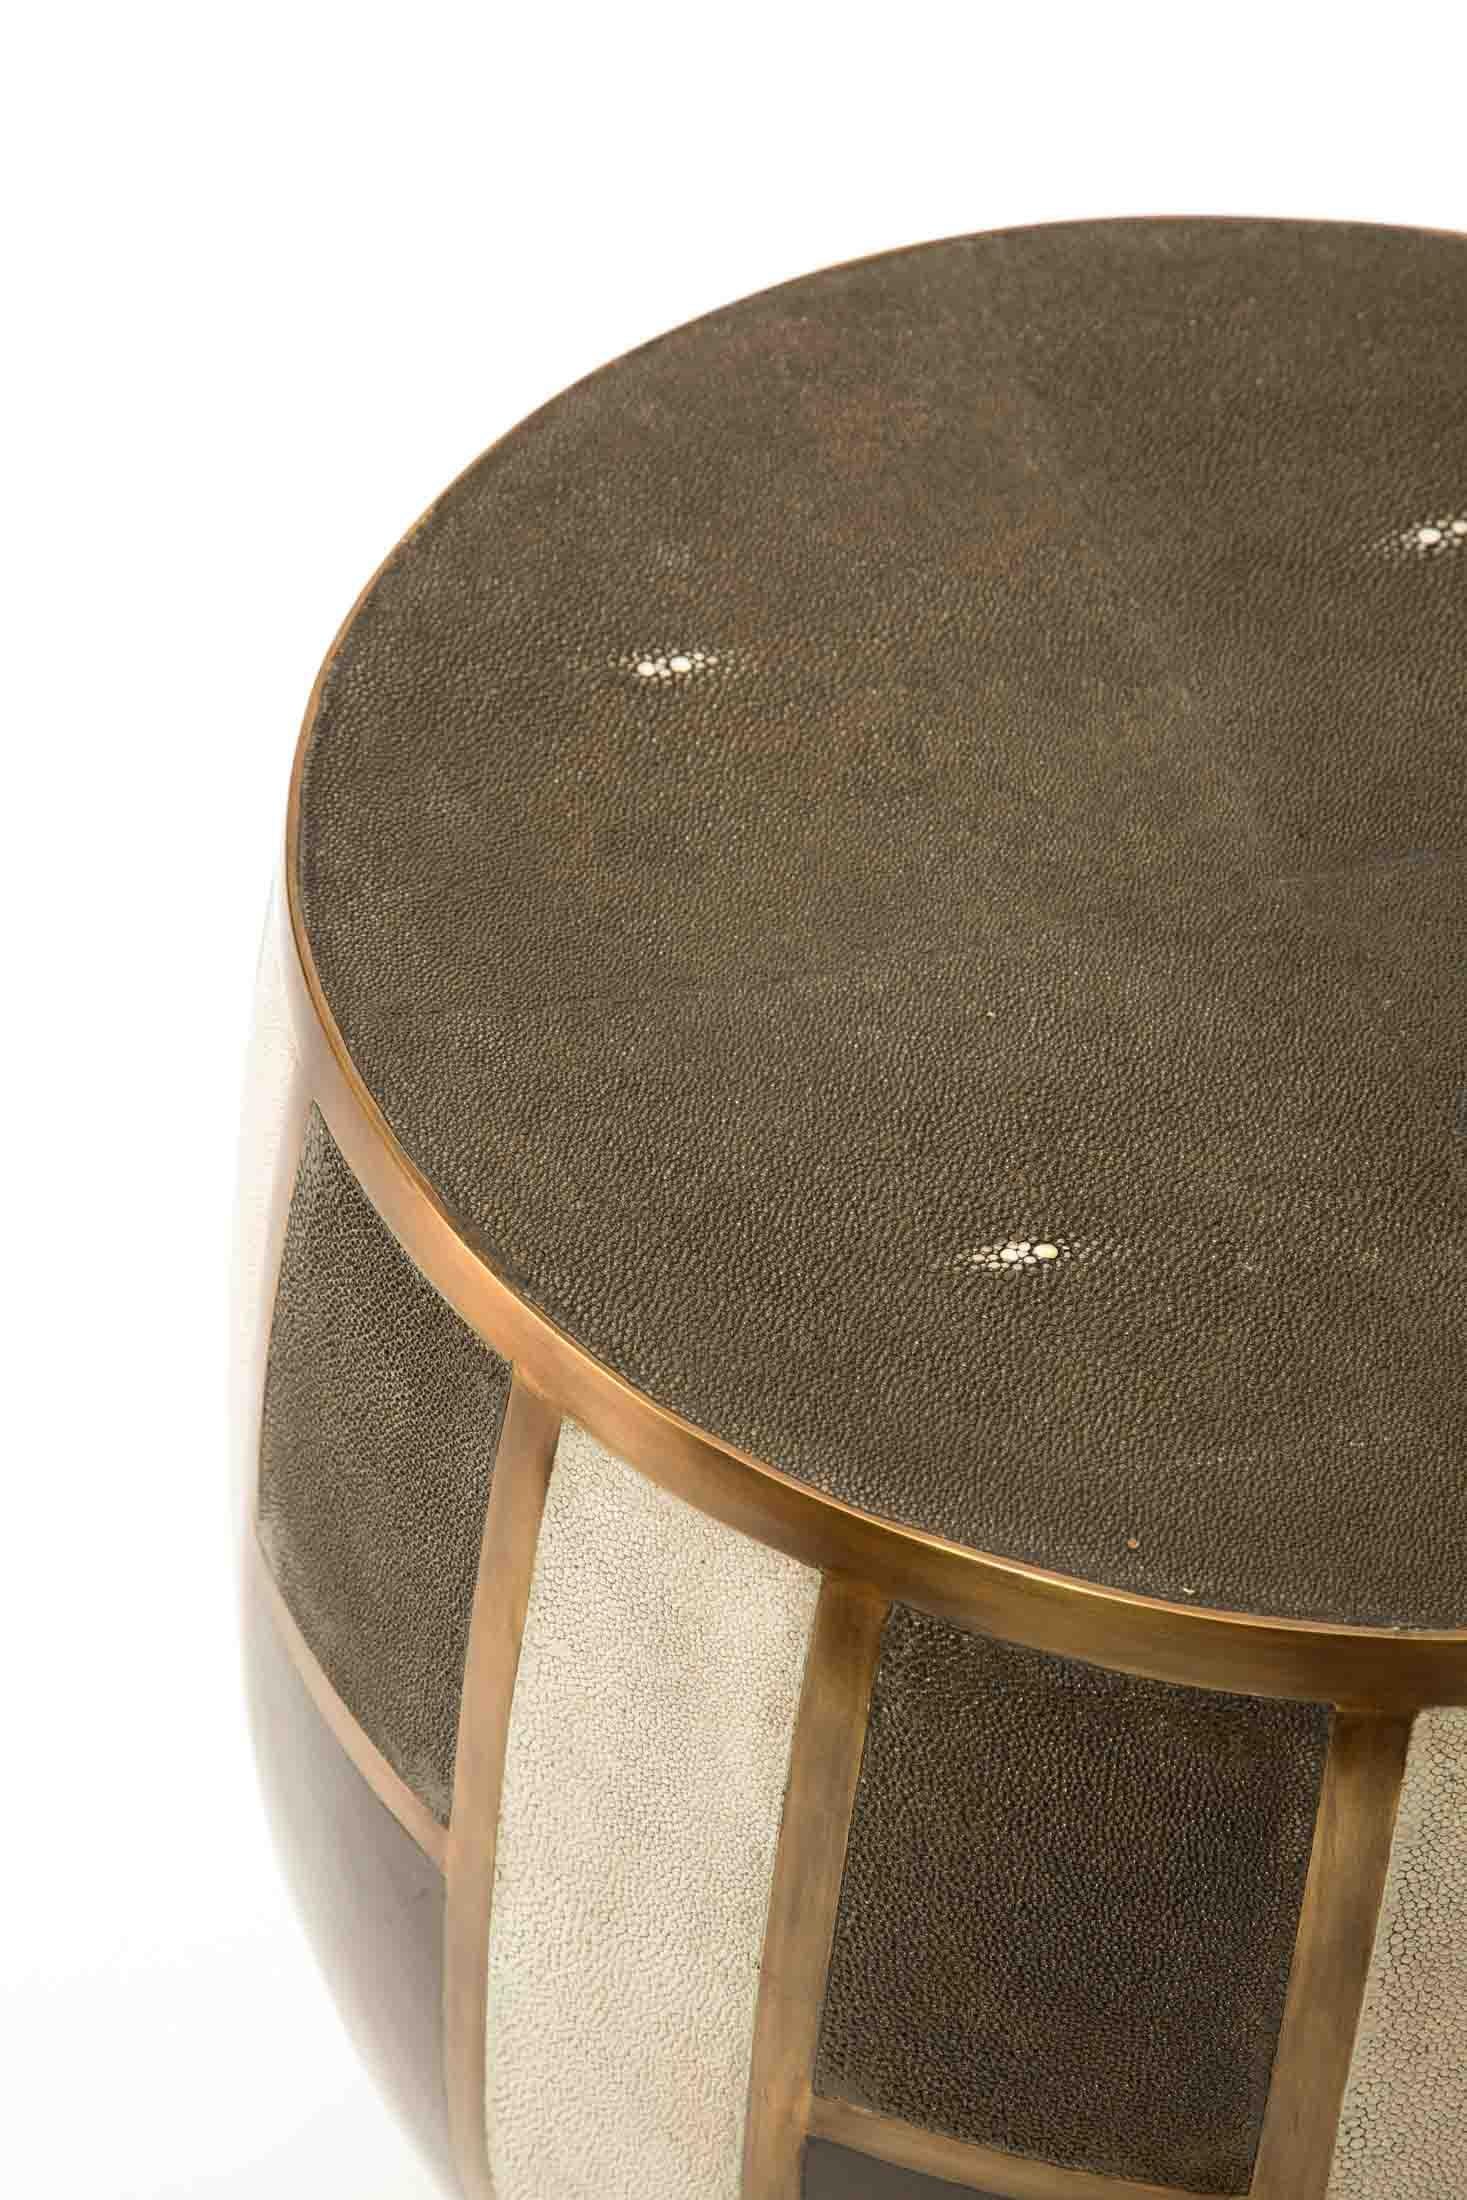 The Tartan stool brings a touch of pattern in your space. A perfect harmony between different exotic materials that are signature to the style of R & Y Augousti. The sleek brass edge makes for an elegant touch. Available in two different variations: